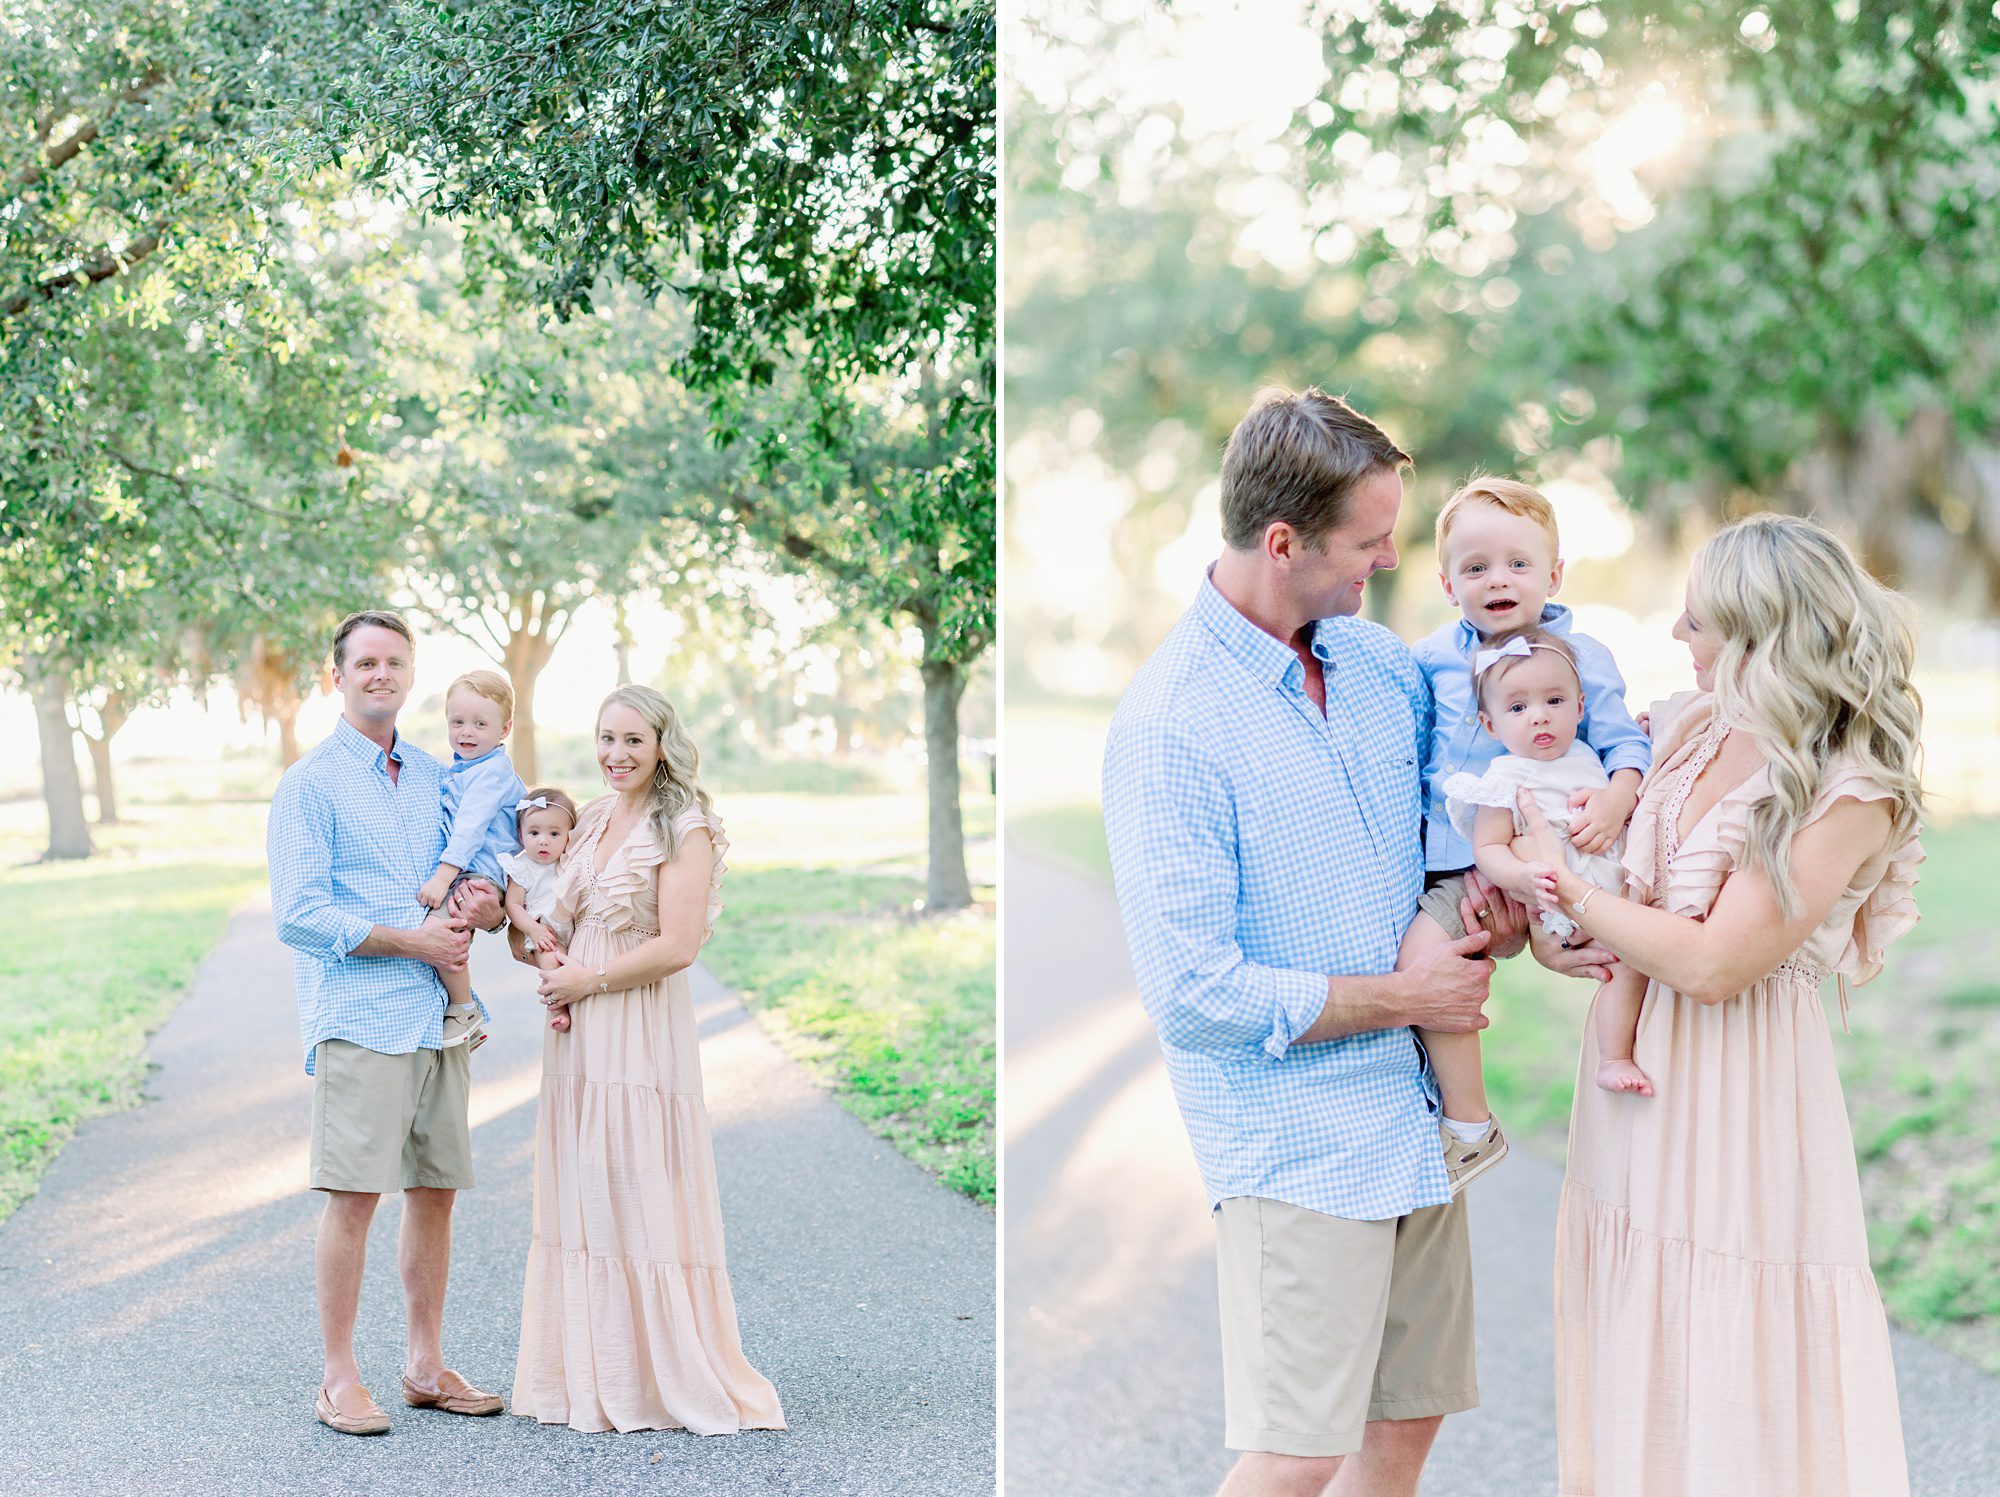 Adorable family of 4 gets portraits done at sunset in a park with pretty trees. 